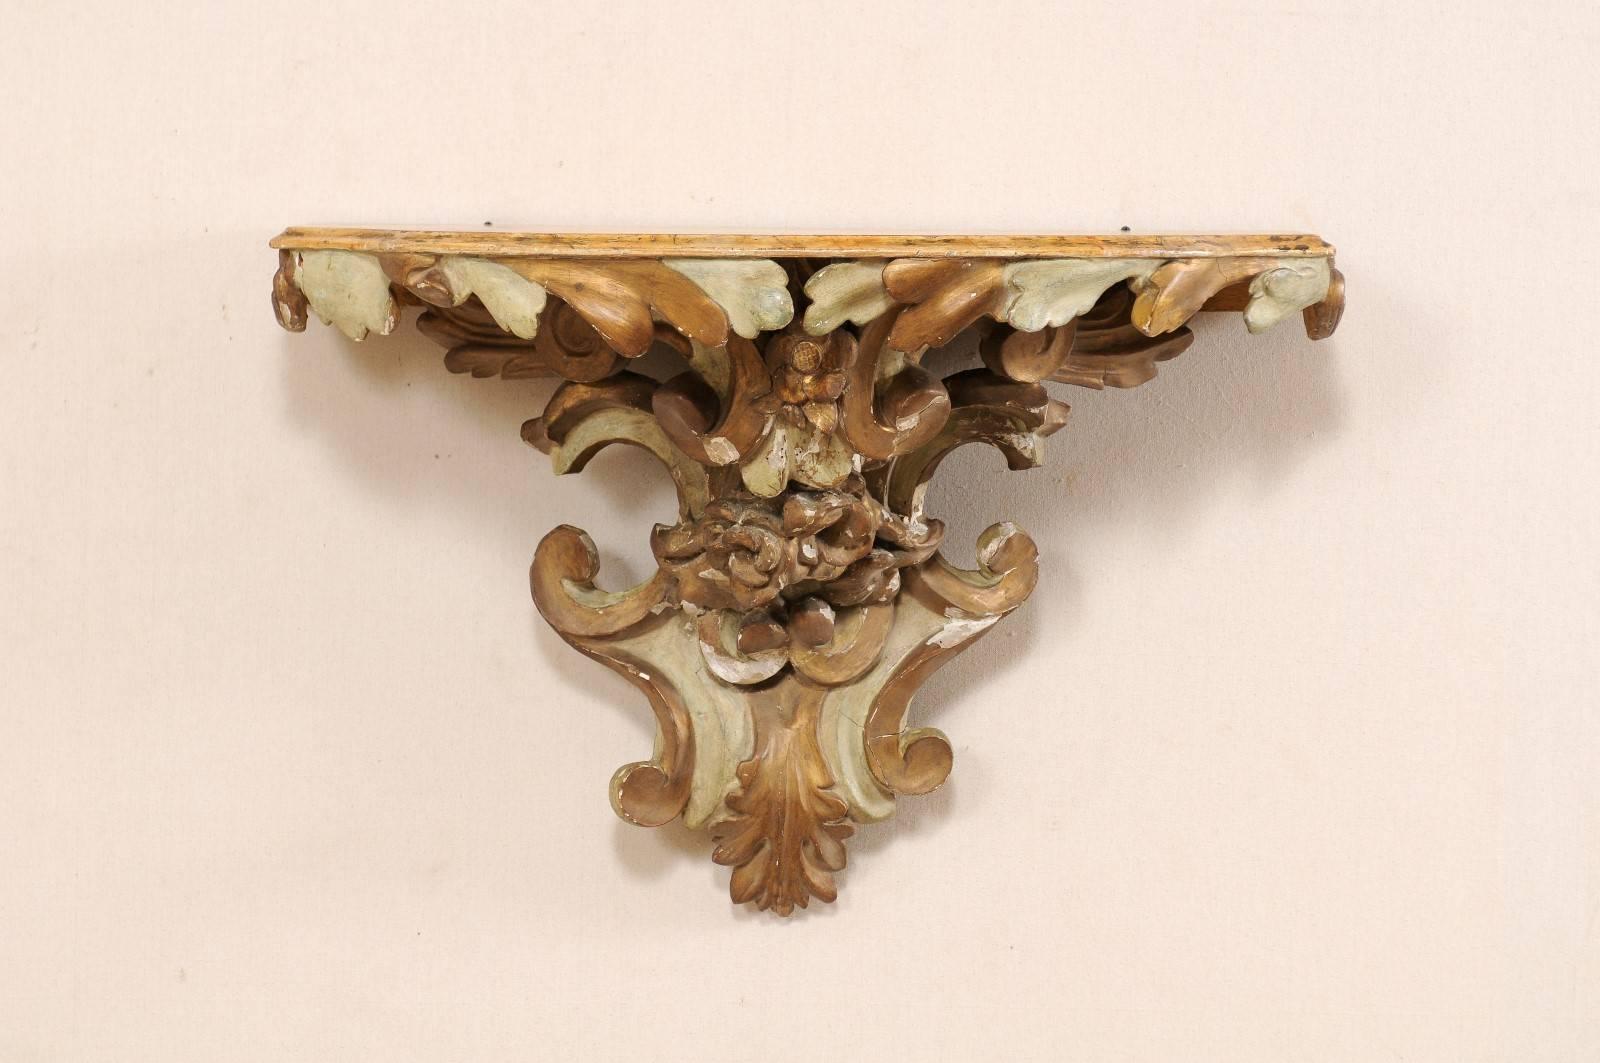 An antique Italian carved wood wall-mounted shelf. This Italian architectural piece, from the early 19th century, has been hand-carved in a scroll and leaf motif. The shelf top has a beveled edge and a faux marbled finish. The base is primarily a